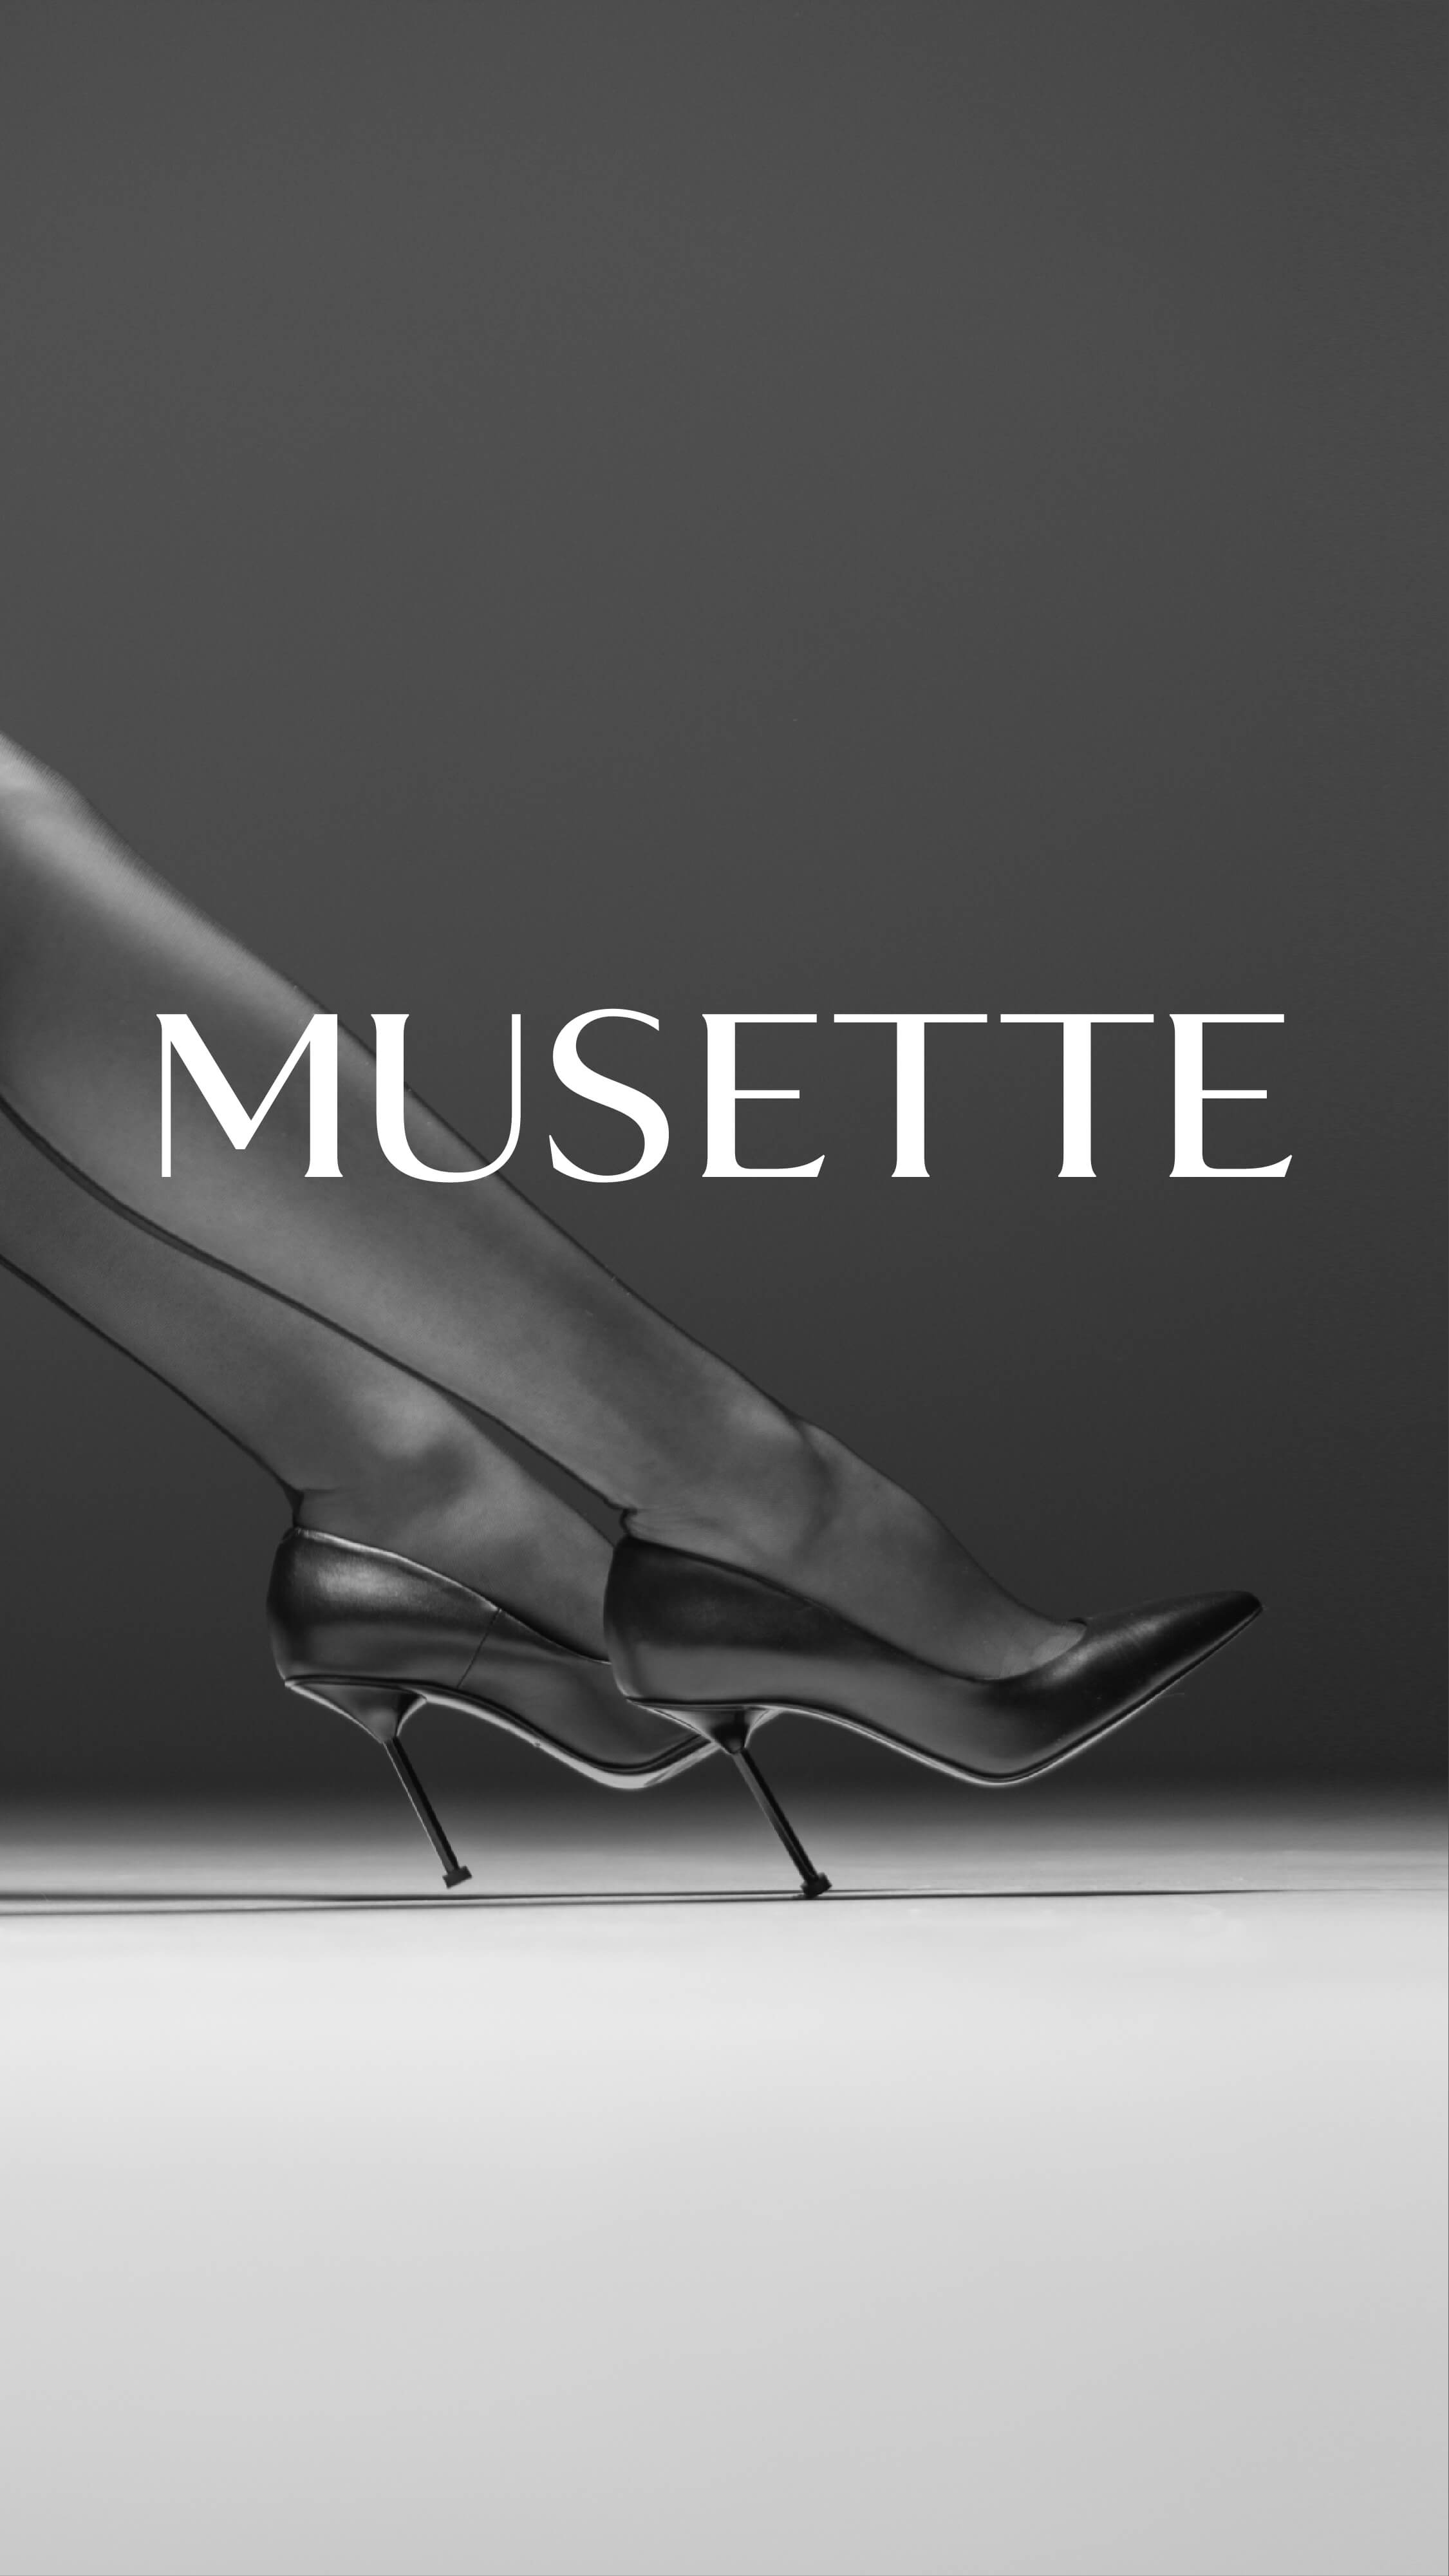 Musette- Shoes, bags and leather made in Romania